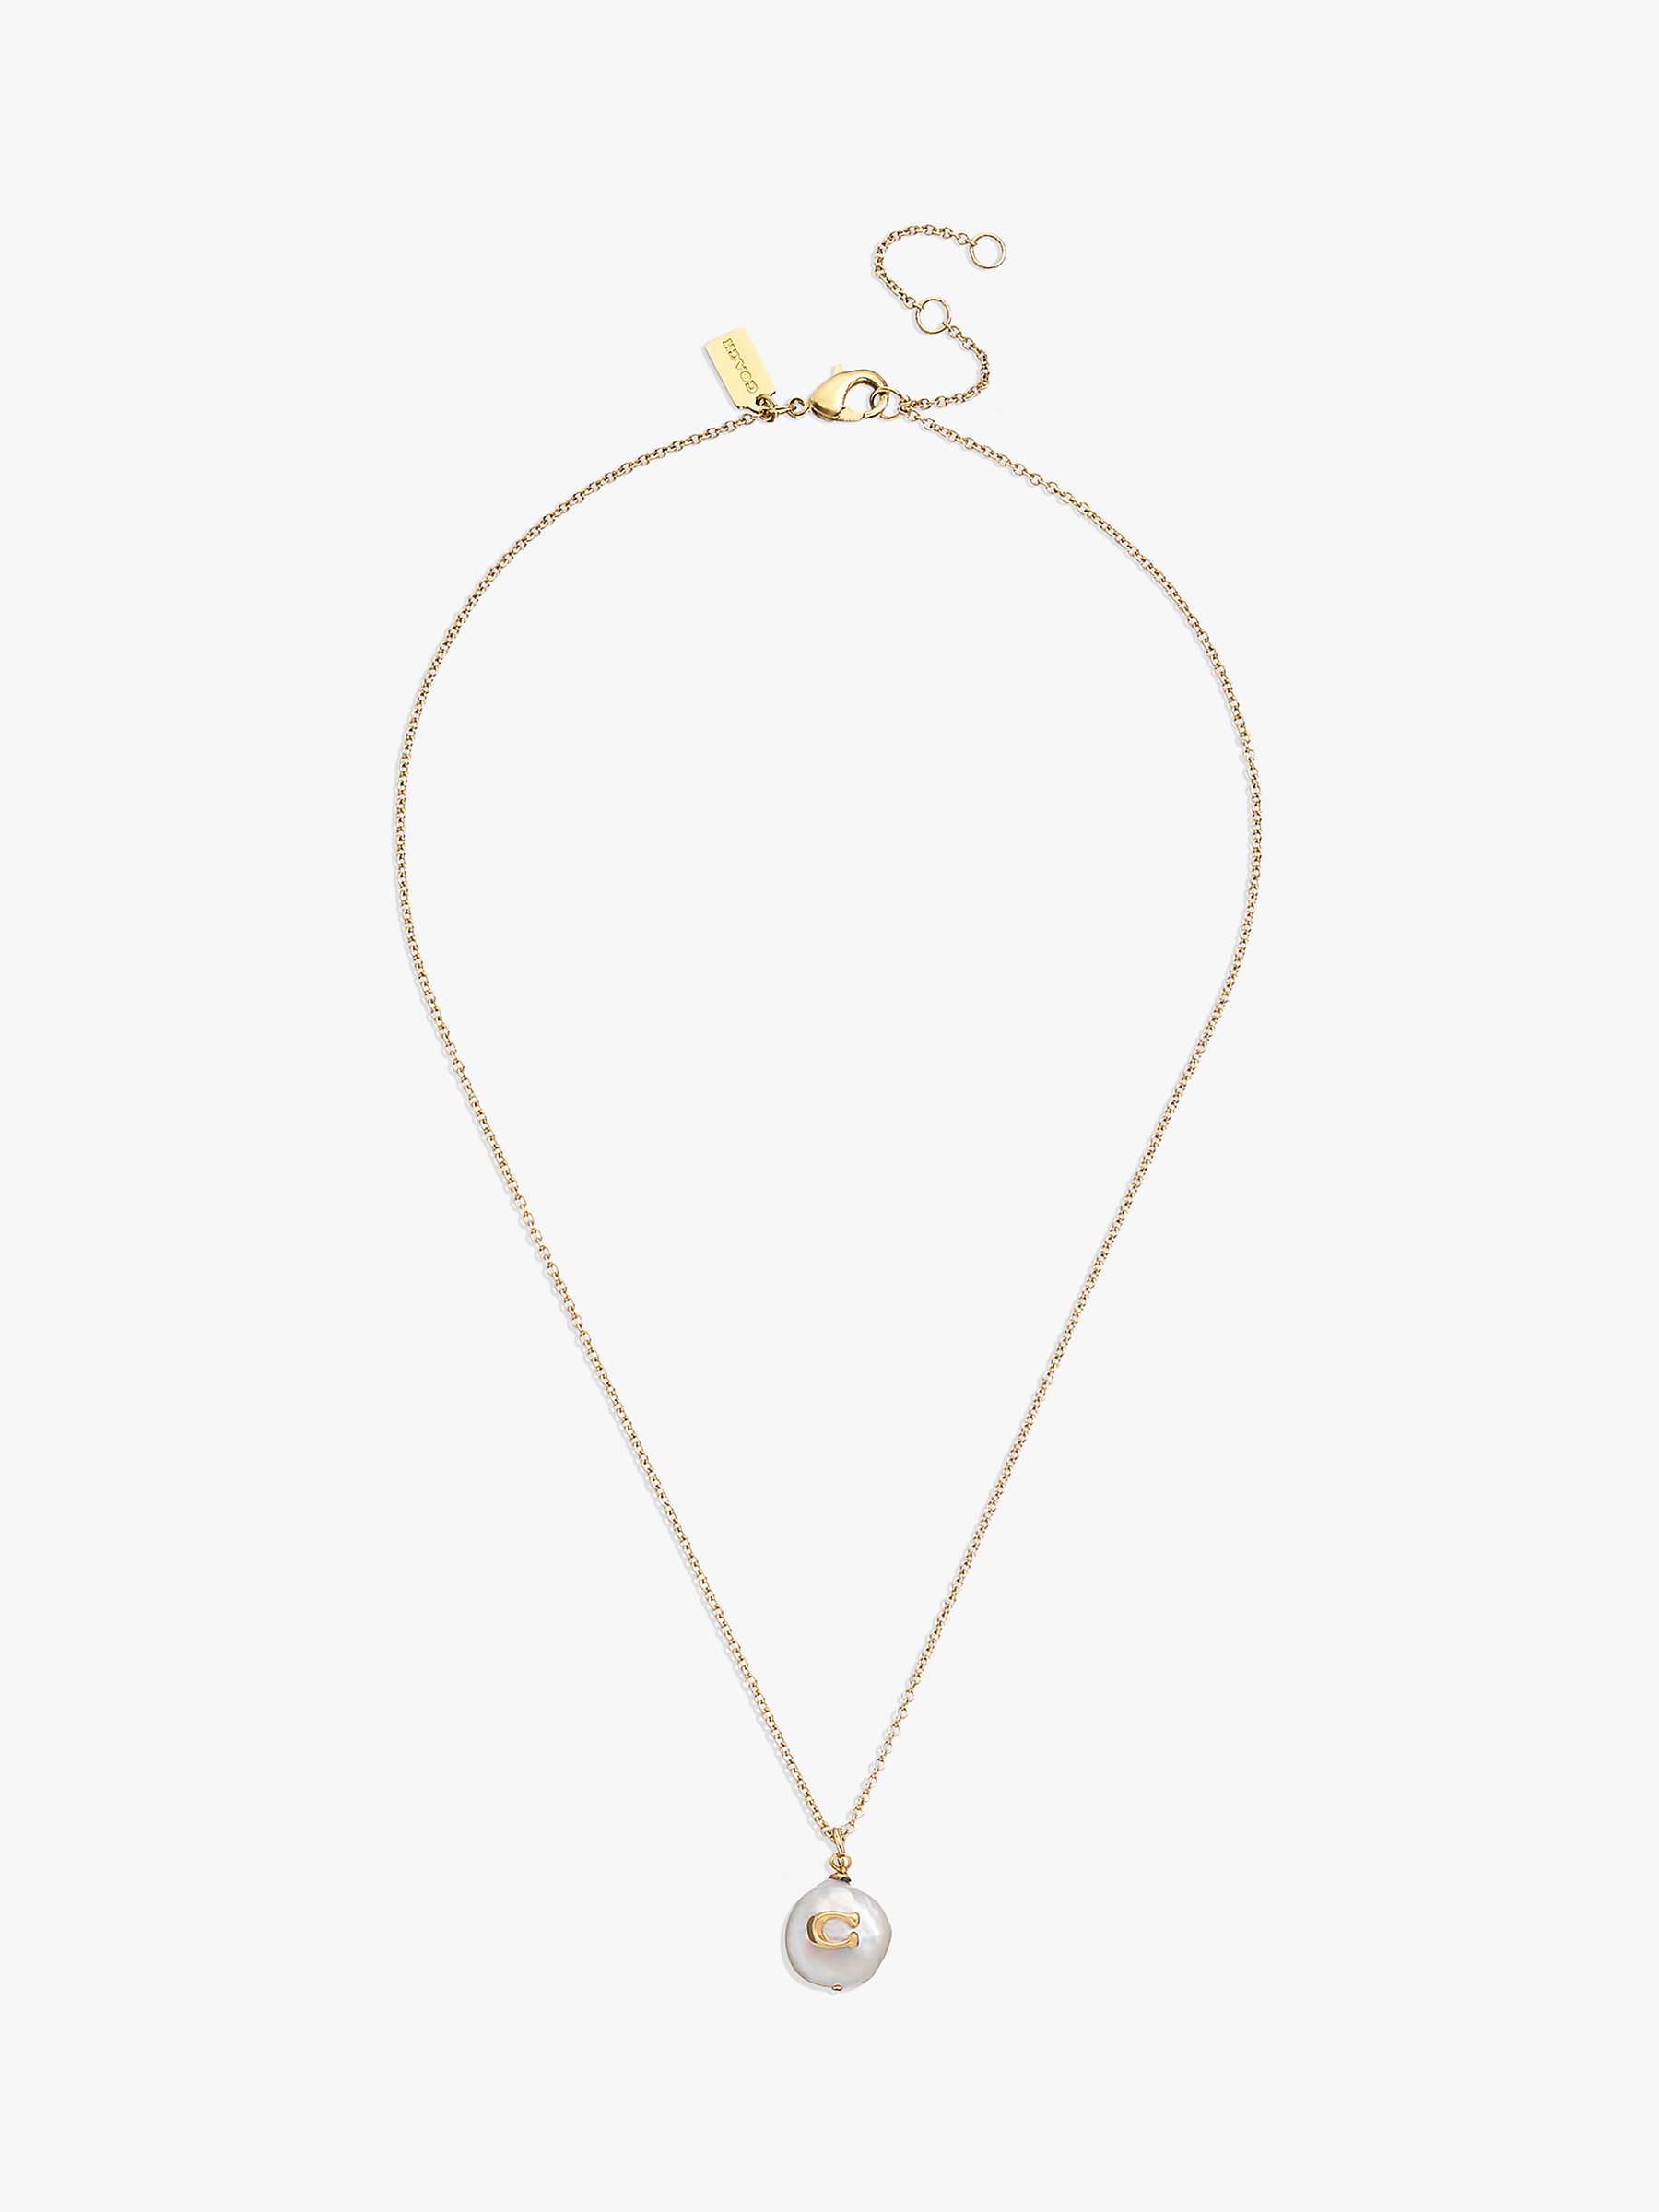 Coach Freshwater Pearl Pendant Necklace, Gold at John Lewis & Partners